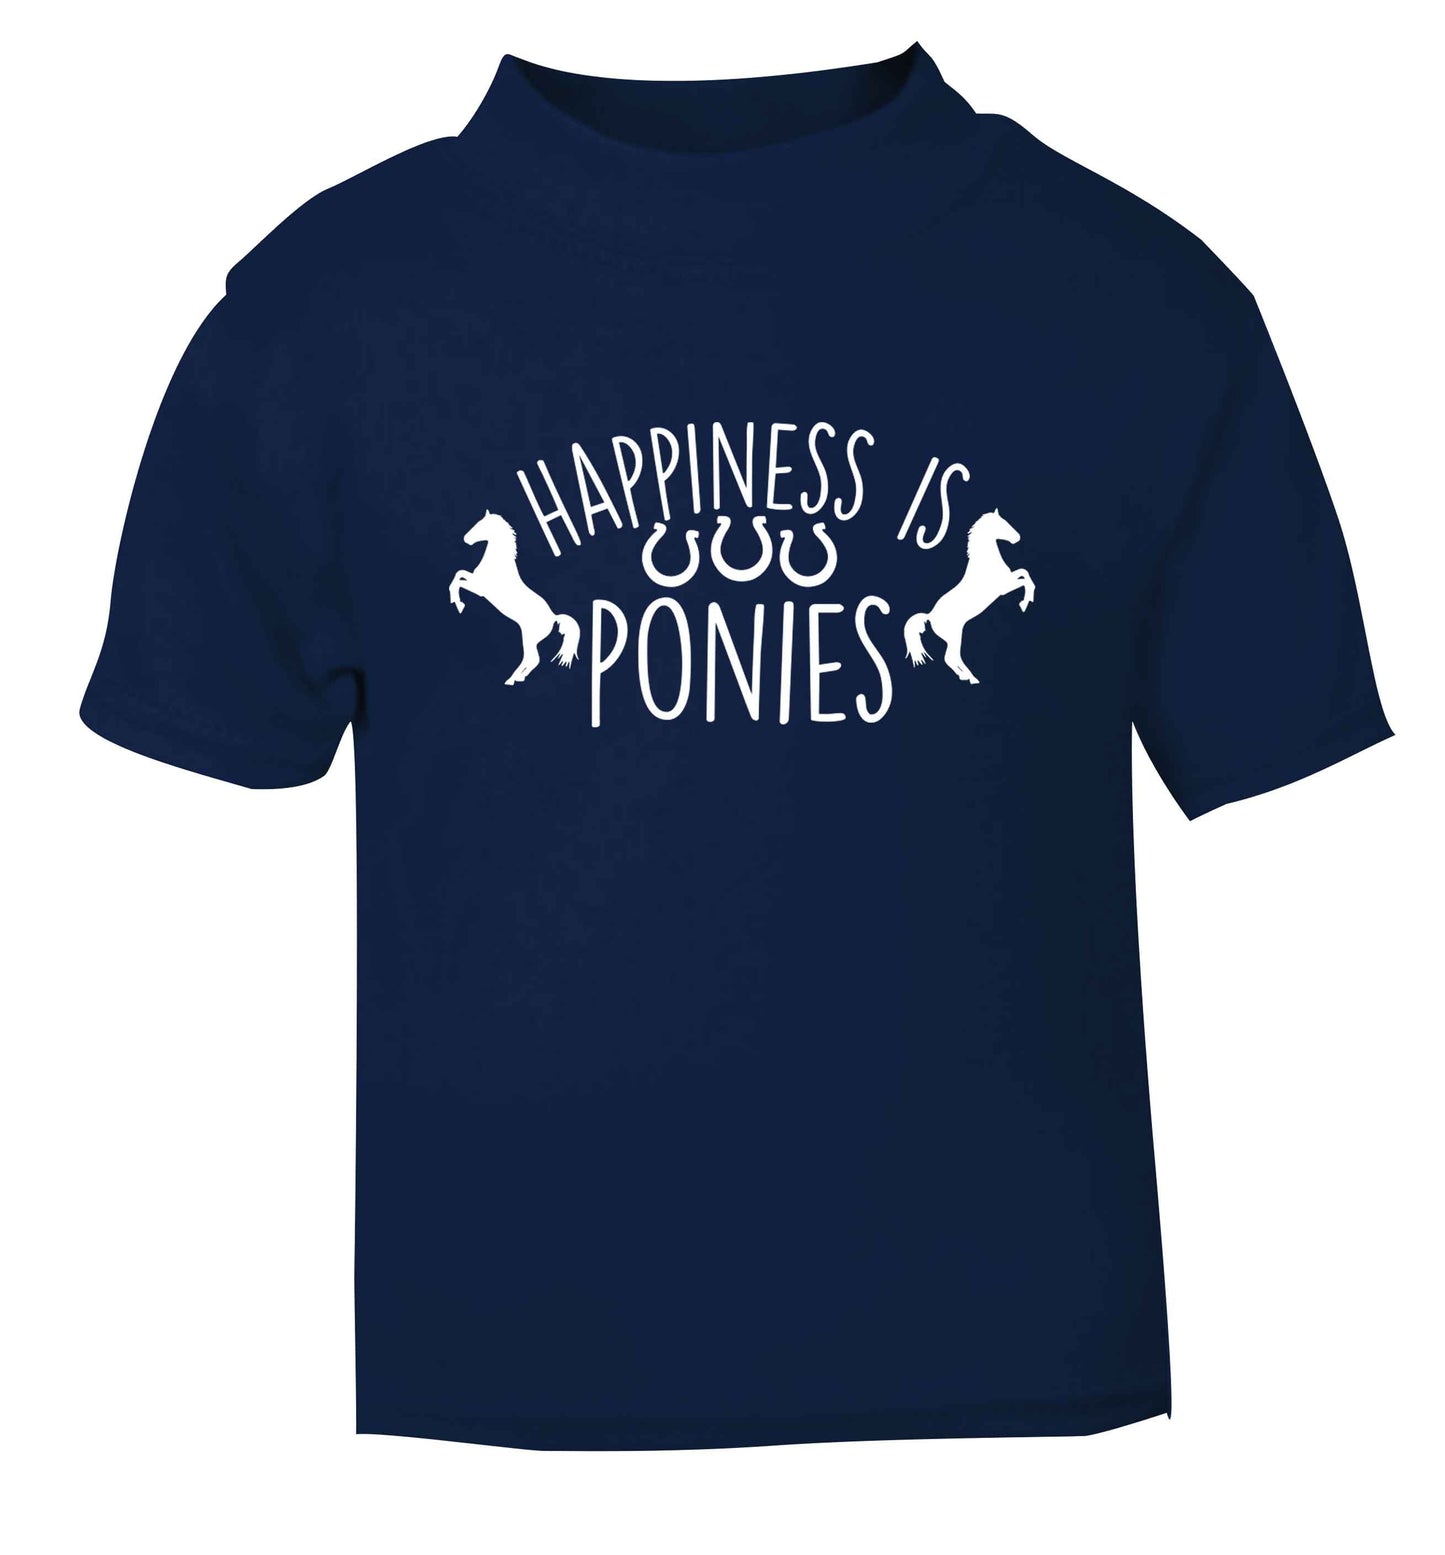 Happiness is ponies navy baby toddler Tshirt 2 Years